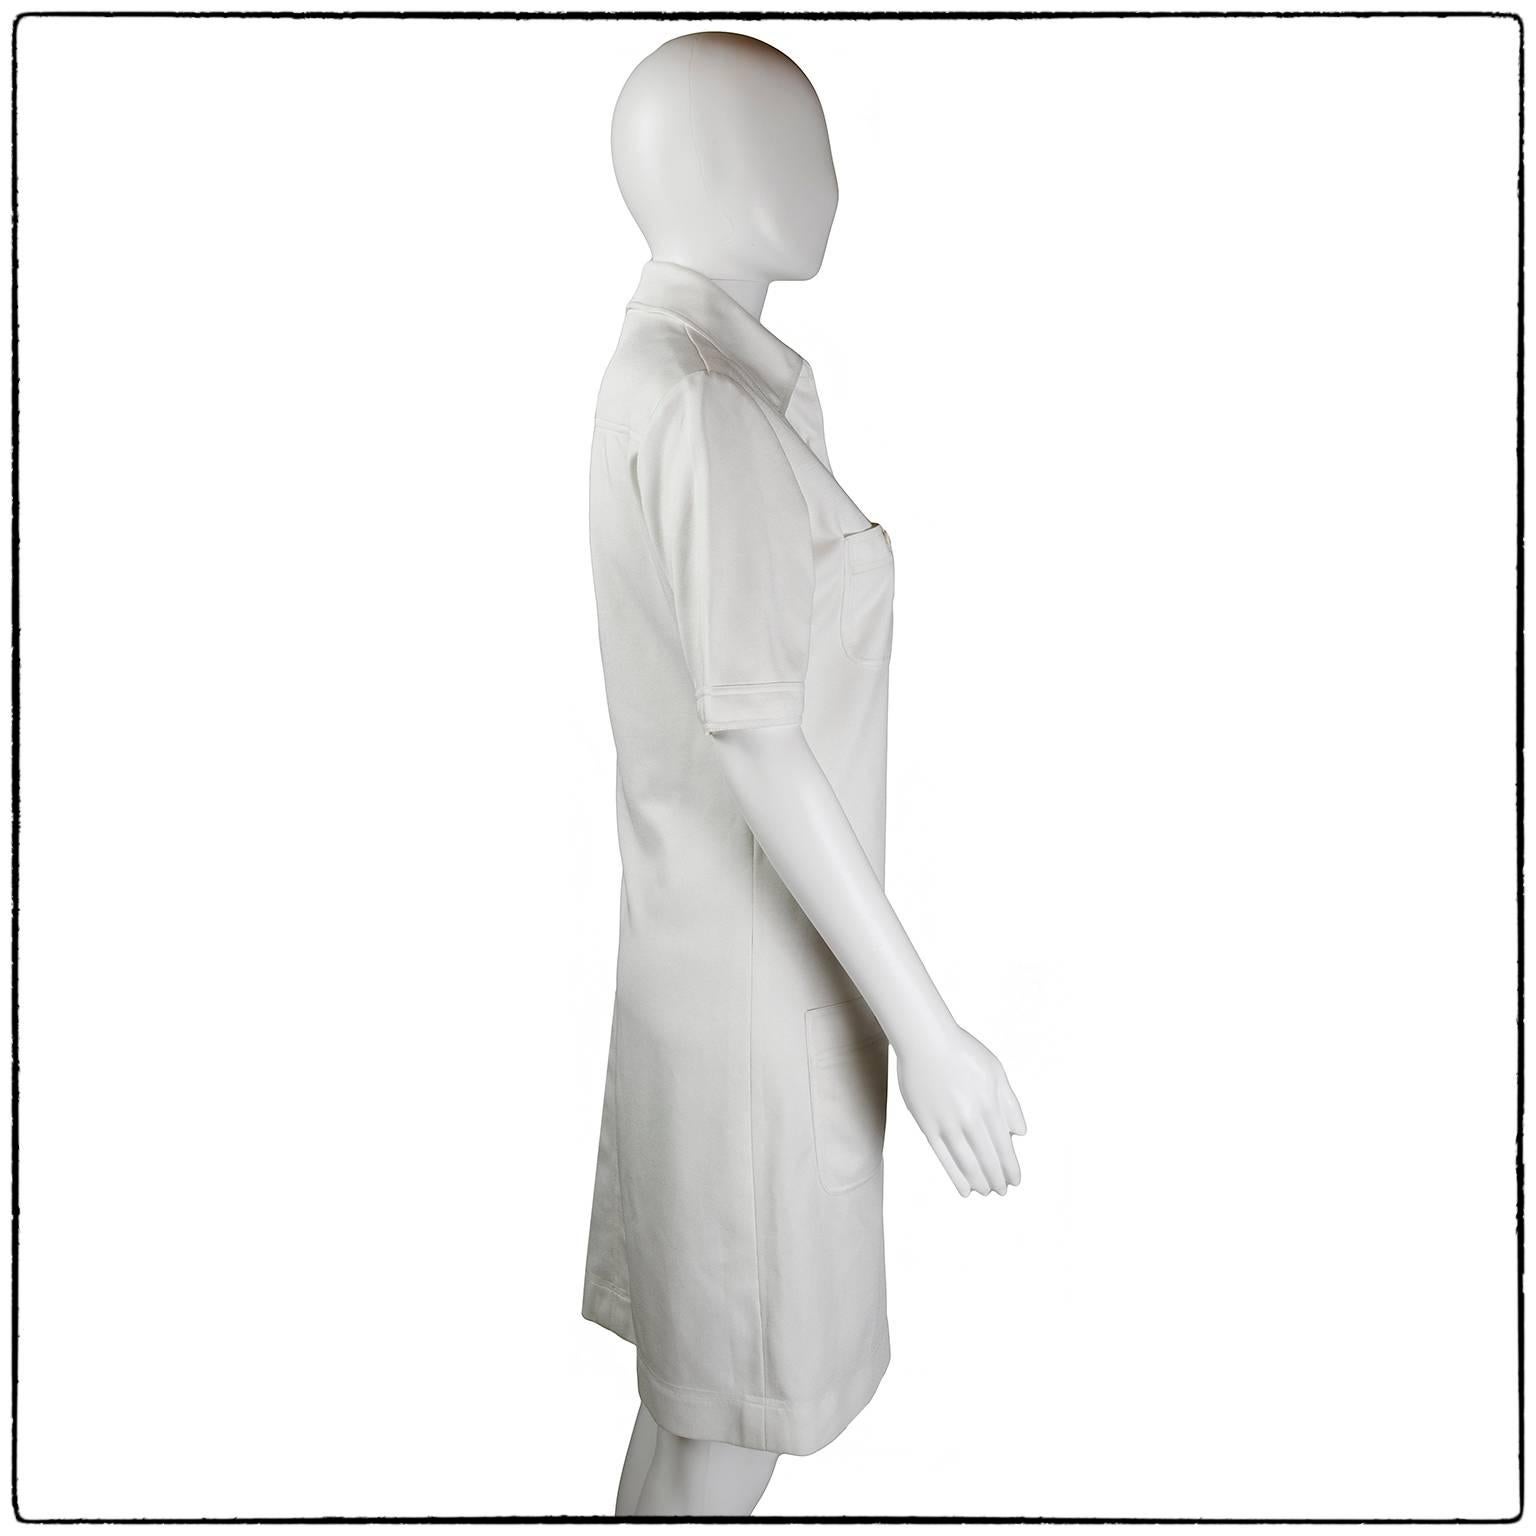 Minimalist and Iconic  Yves Saint Laurent white dress, circa 1980s

Mark: Saint Laurent

Size: 42 IT, 10 UK, 6 US

Material: There's no fabric label 

Conditions: Good condition, some signs of wear, just a little part of the seam at the bottom that